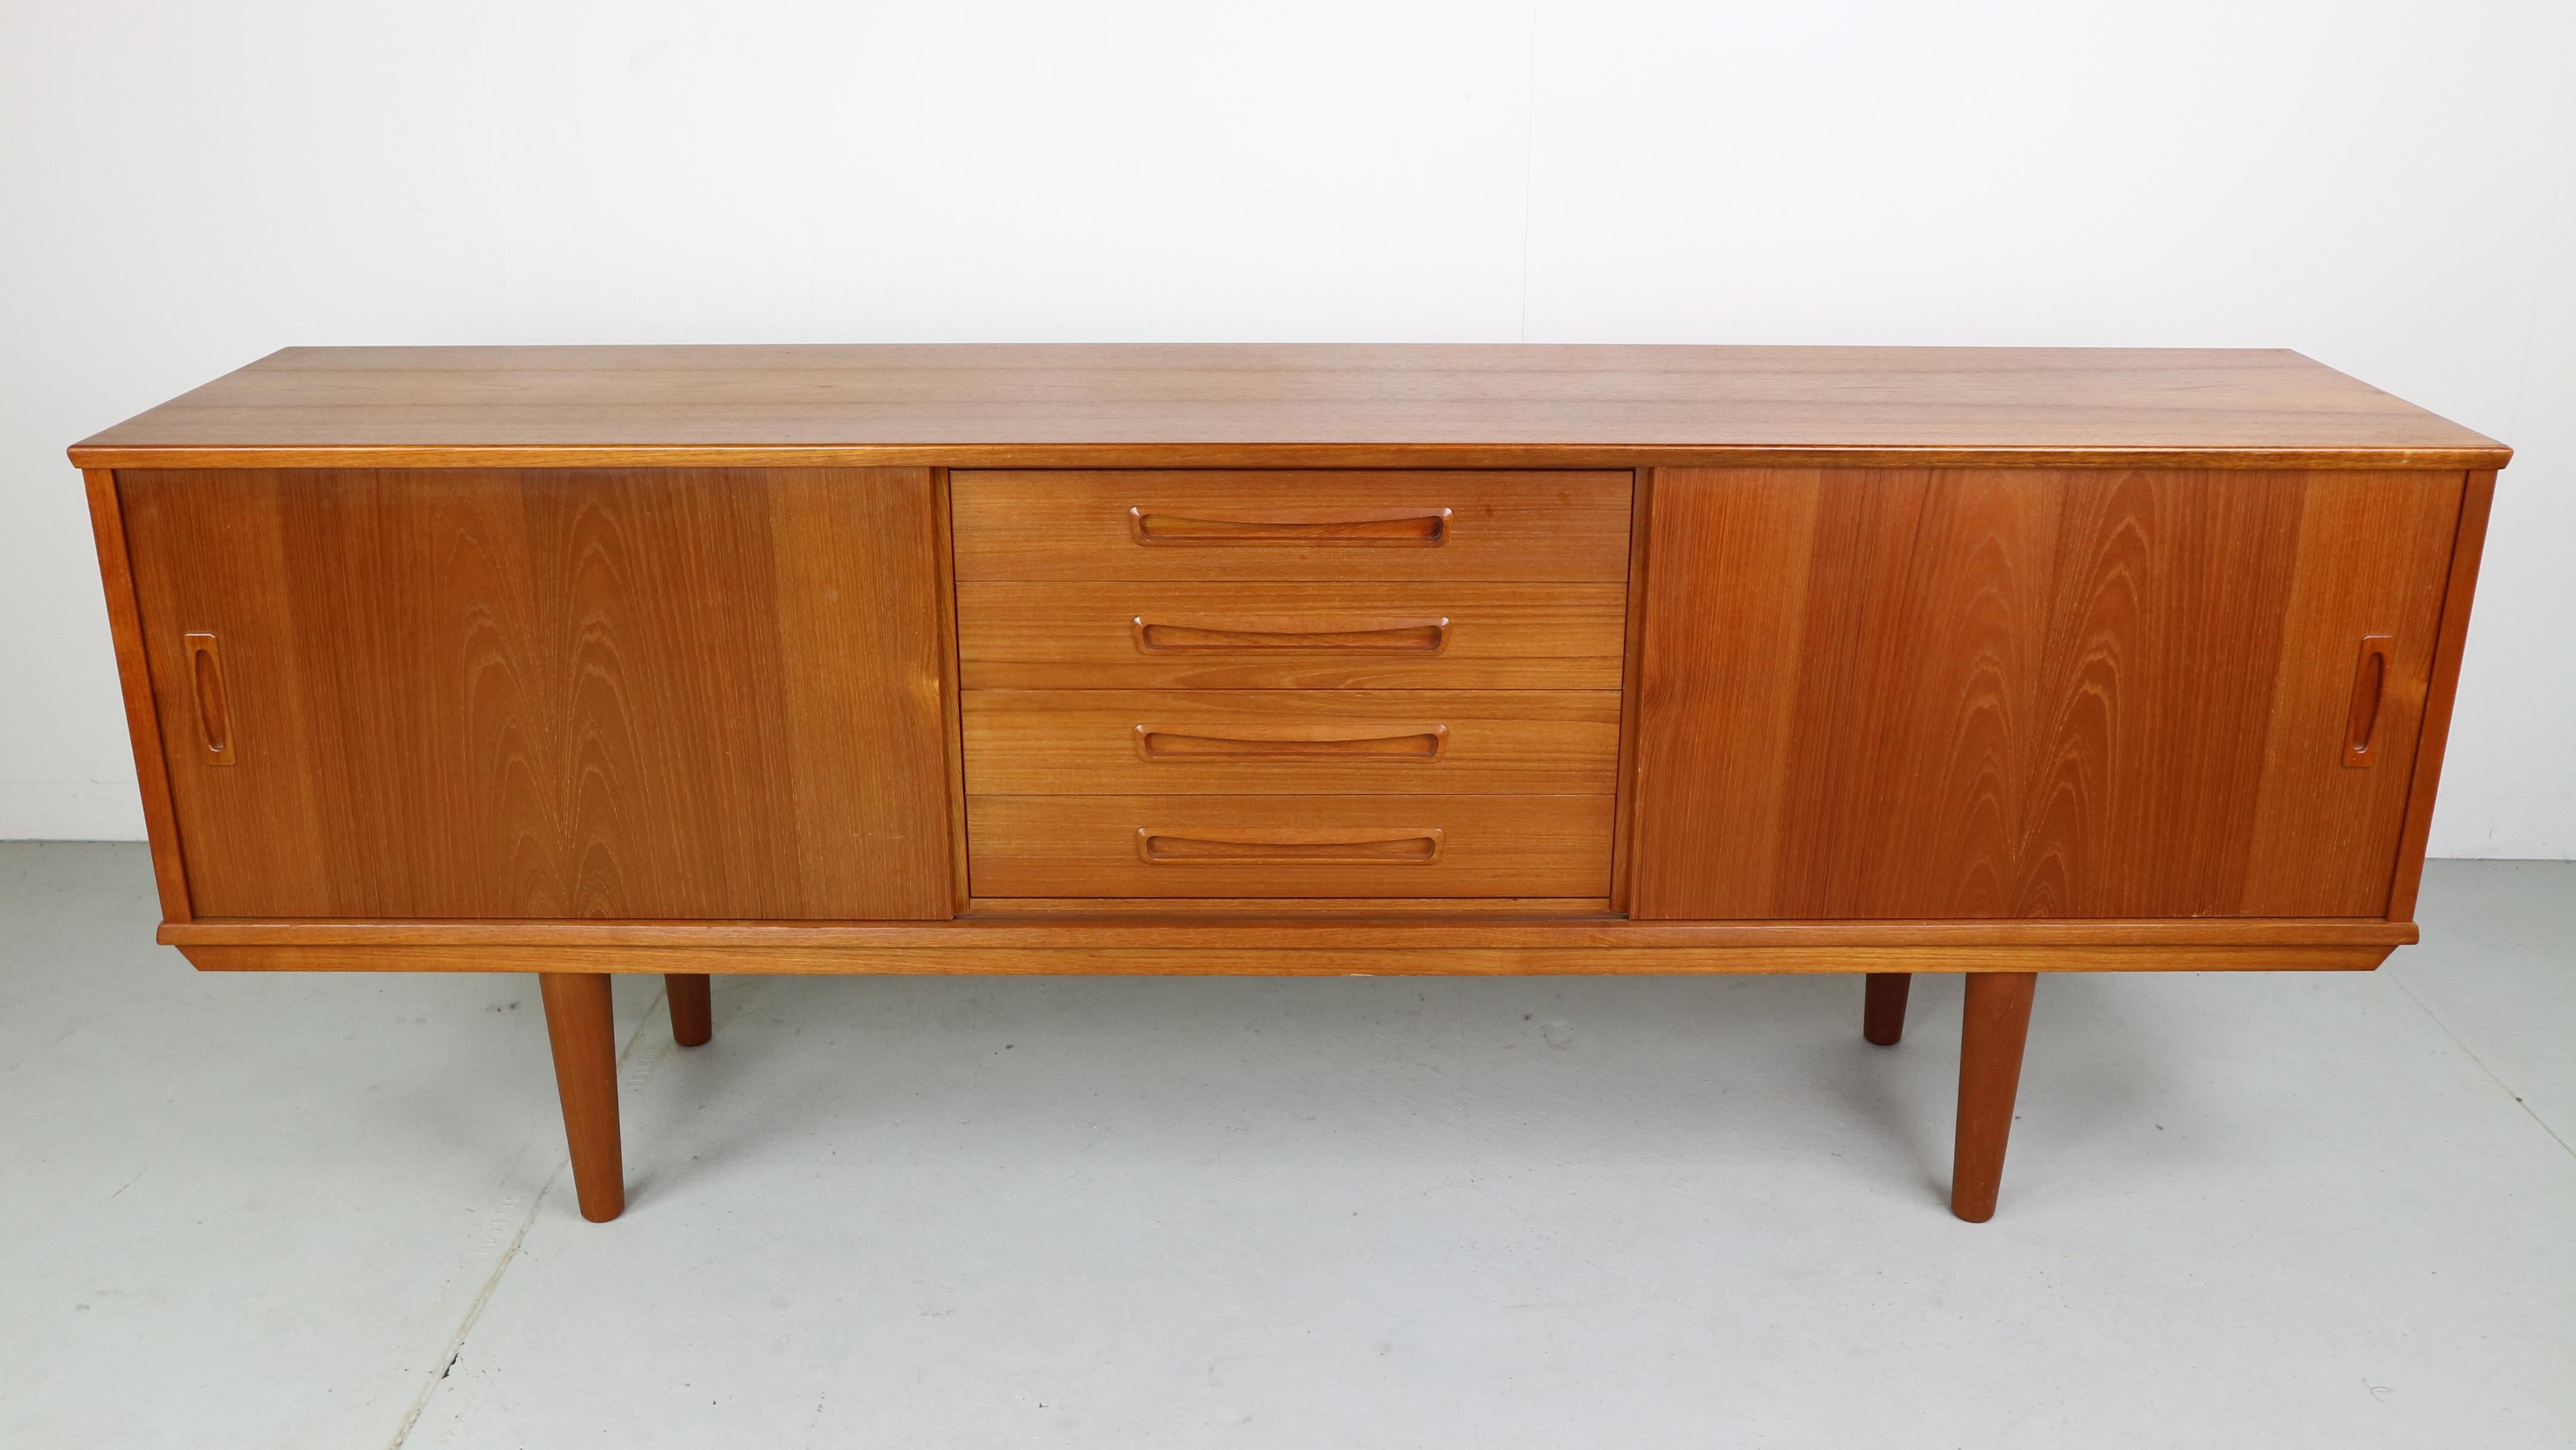 Teaks wood sideboard with 3 drawers and sliding doors, made in Denmark 1960s.
Stamped by the maker.